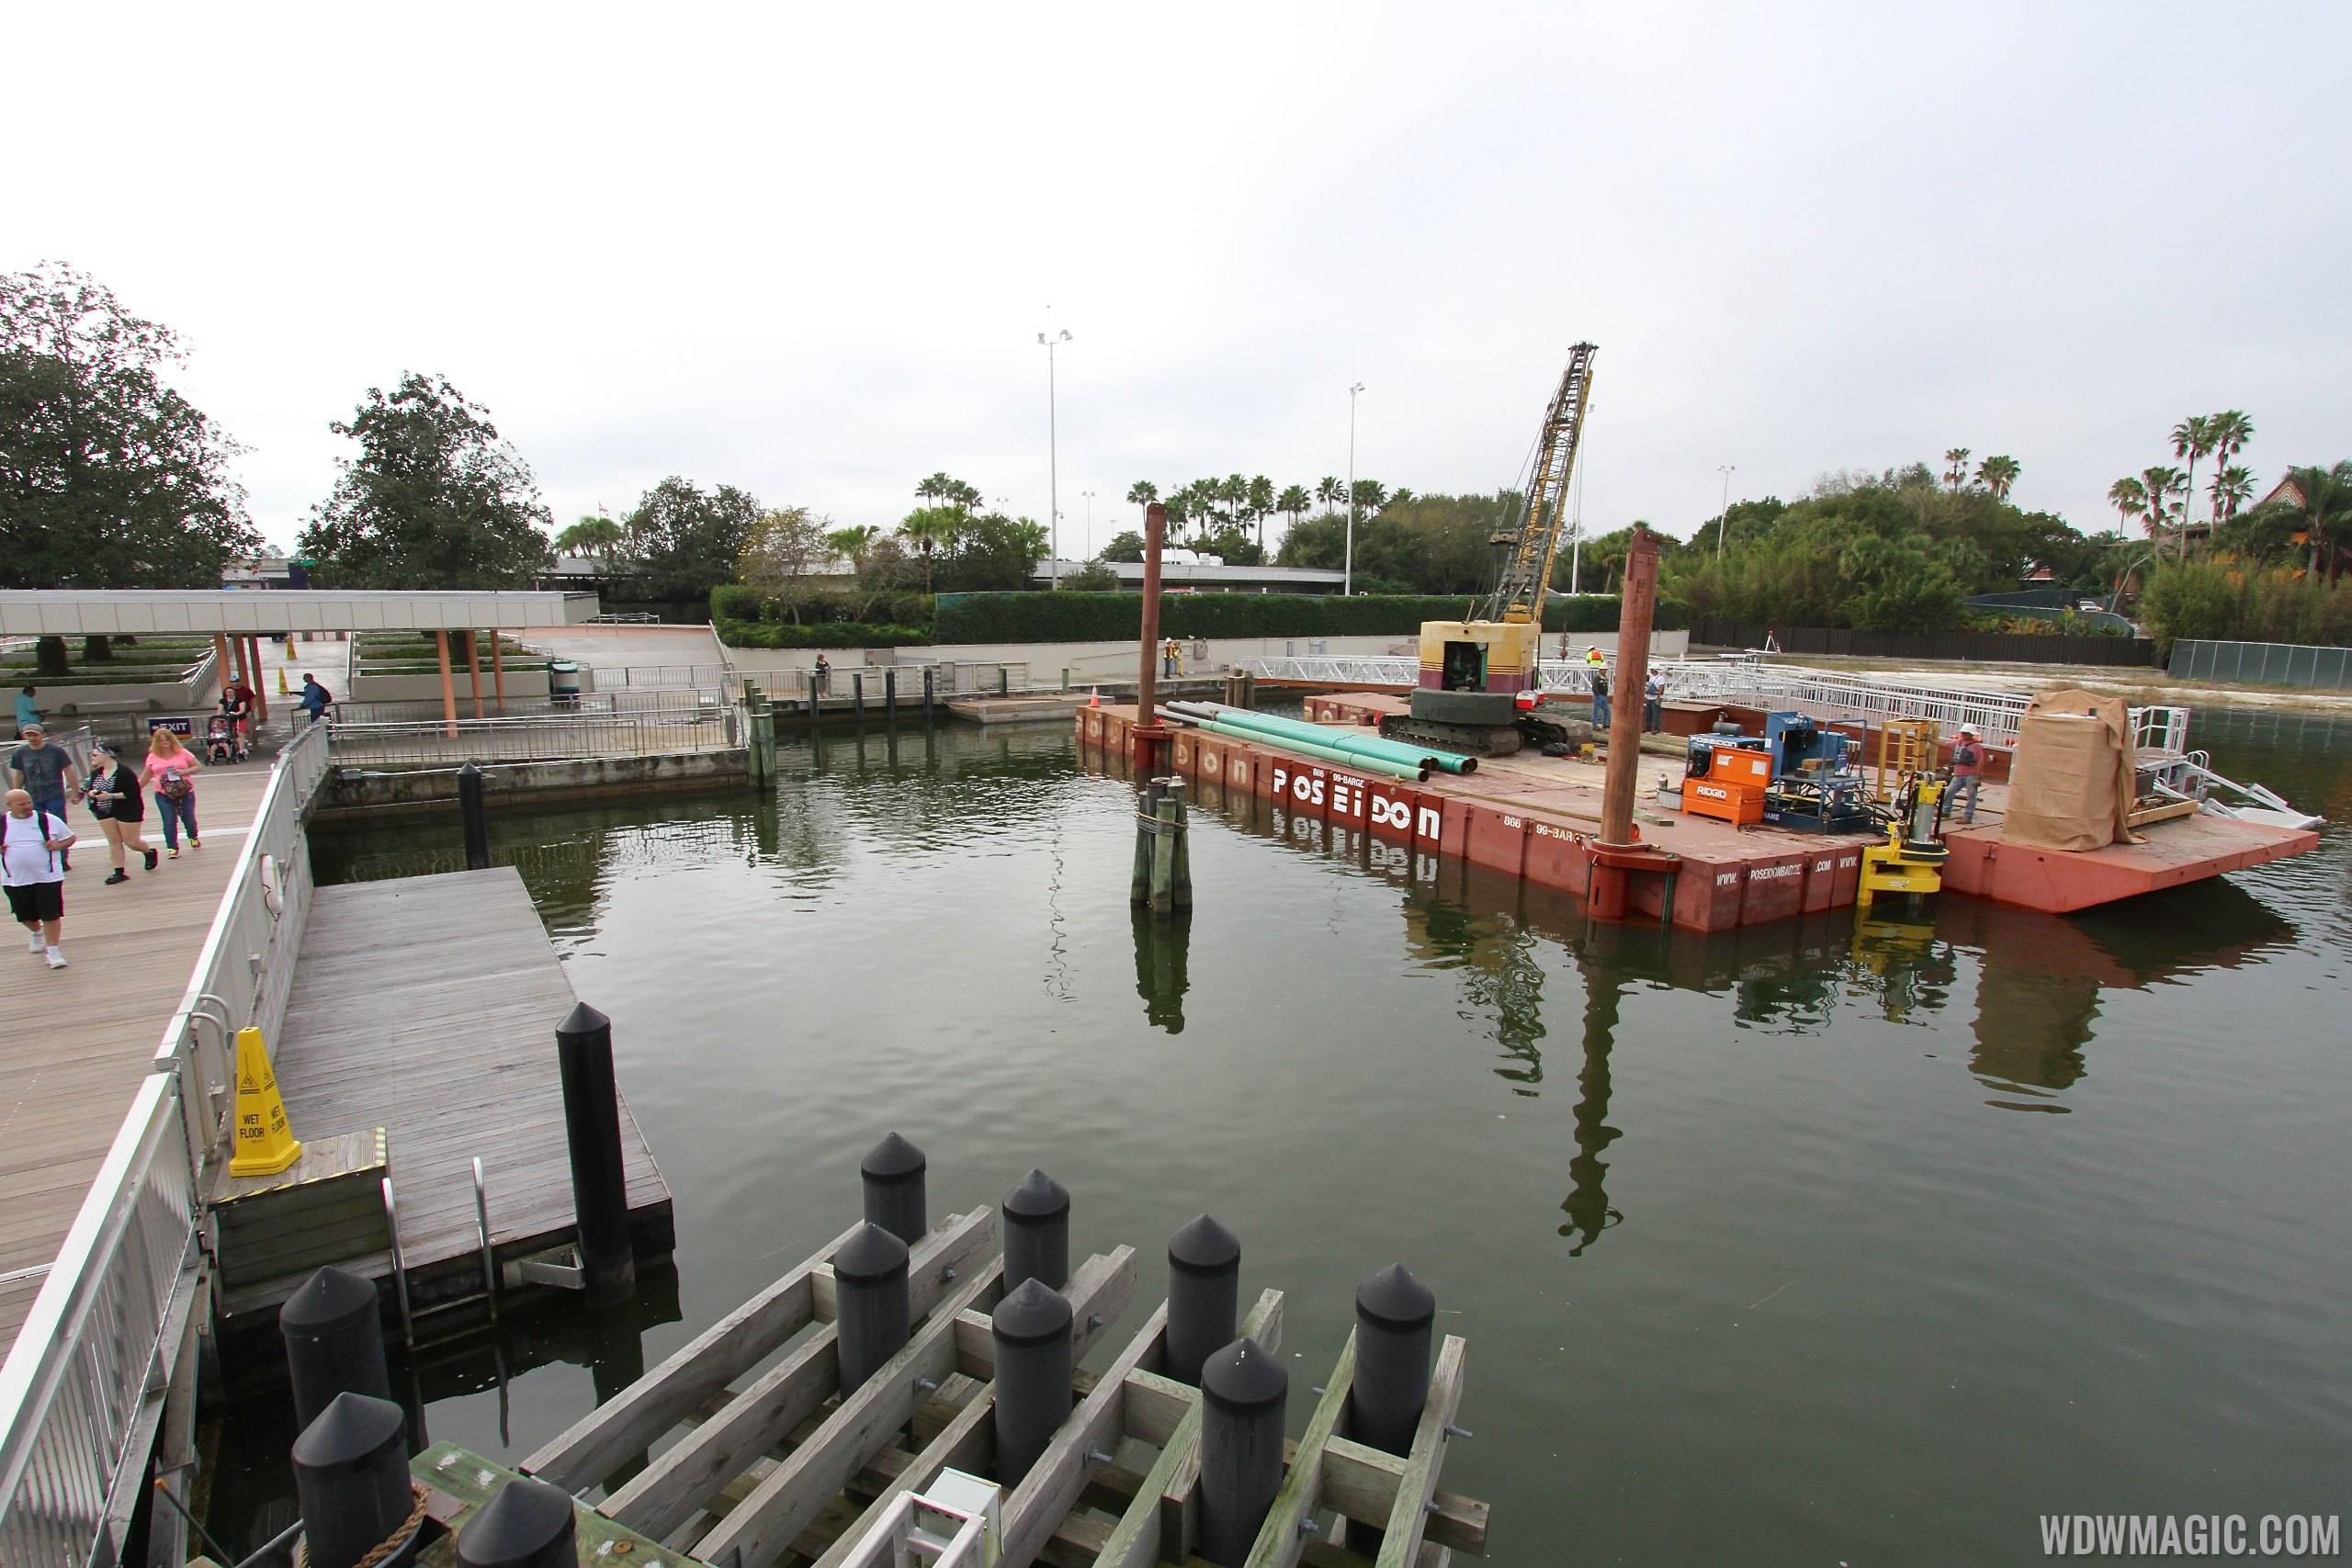 PHOTOS - Second Ferry boat loading dock under construction at the Transportation and Ticket Center